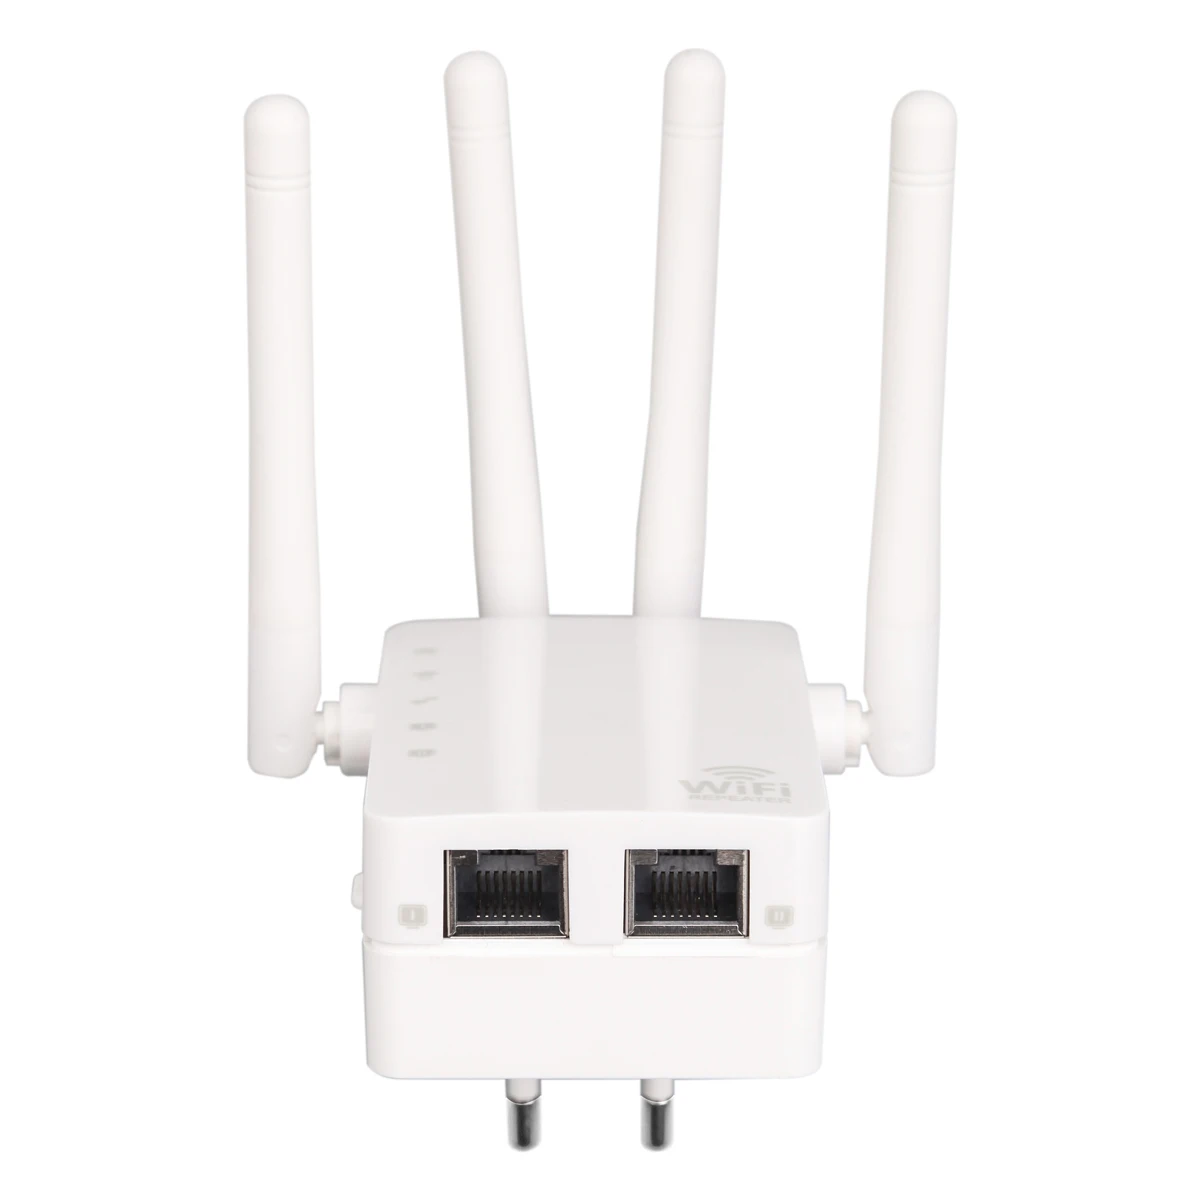 fo sa Wireless-AC 1200M Dual Band WI-FI Router Mini Wireless-AC Repeater 4 External Antennas Support Router/Repeater/Client/AP Mode